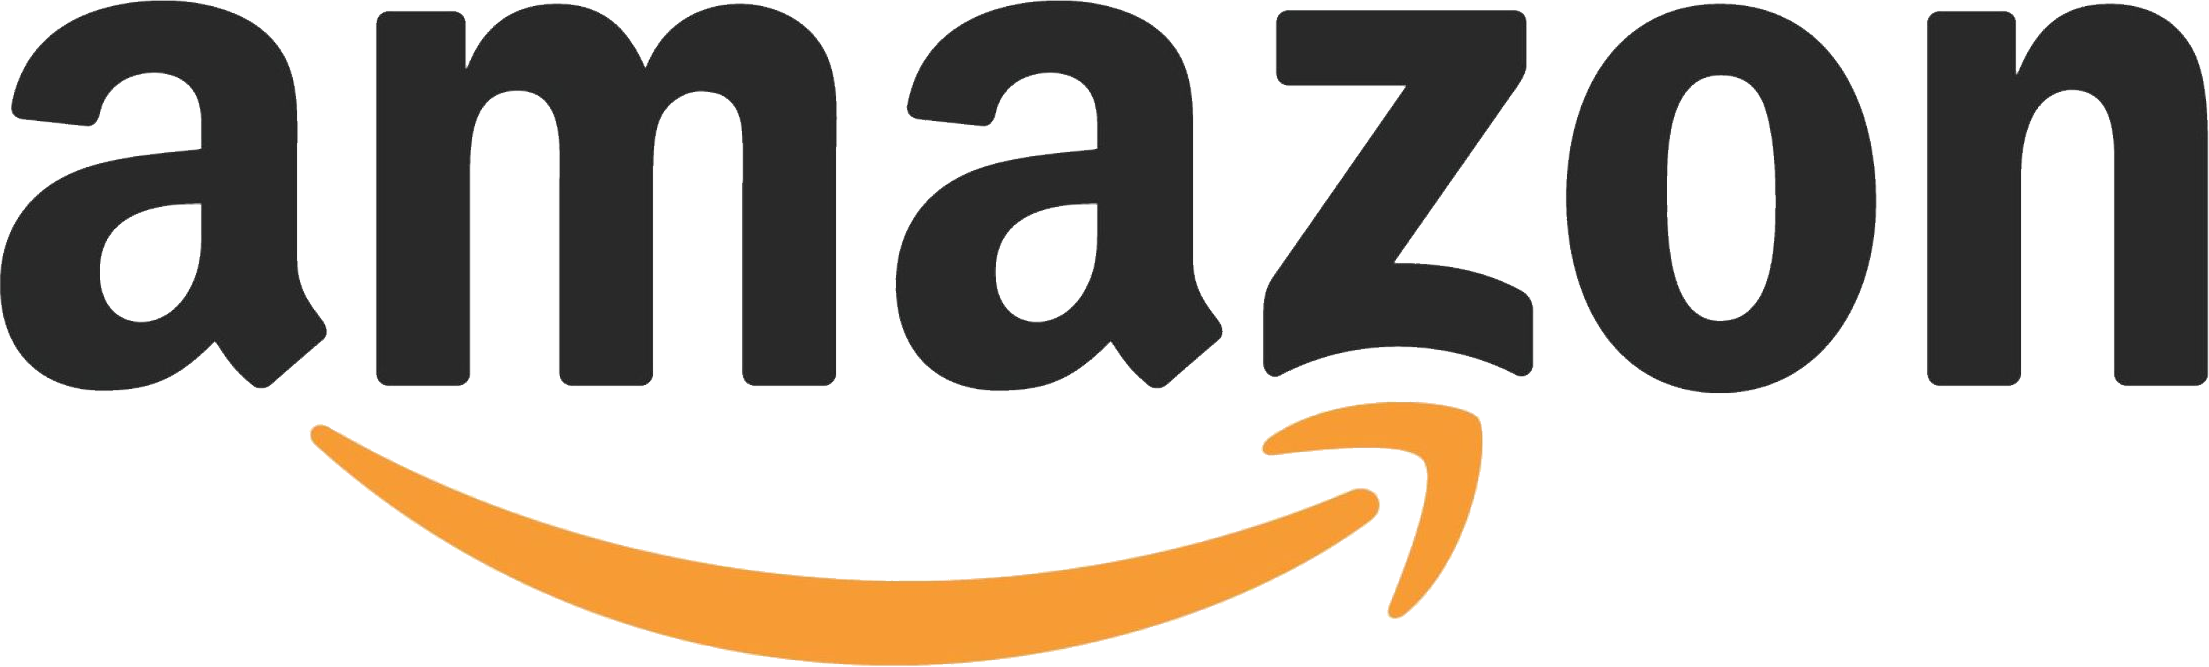 View Current Amazon Coupons Here